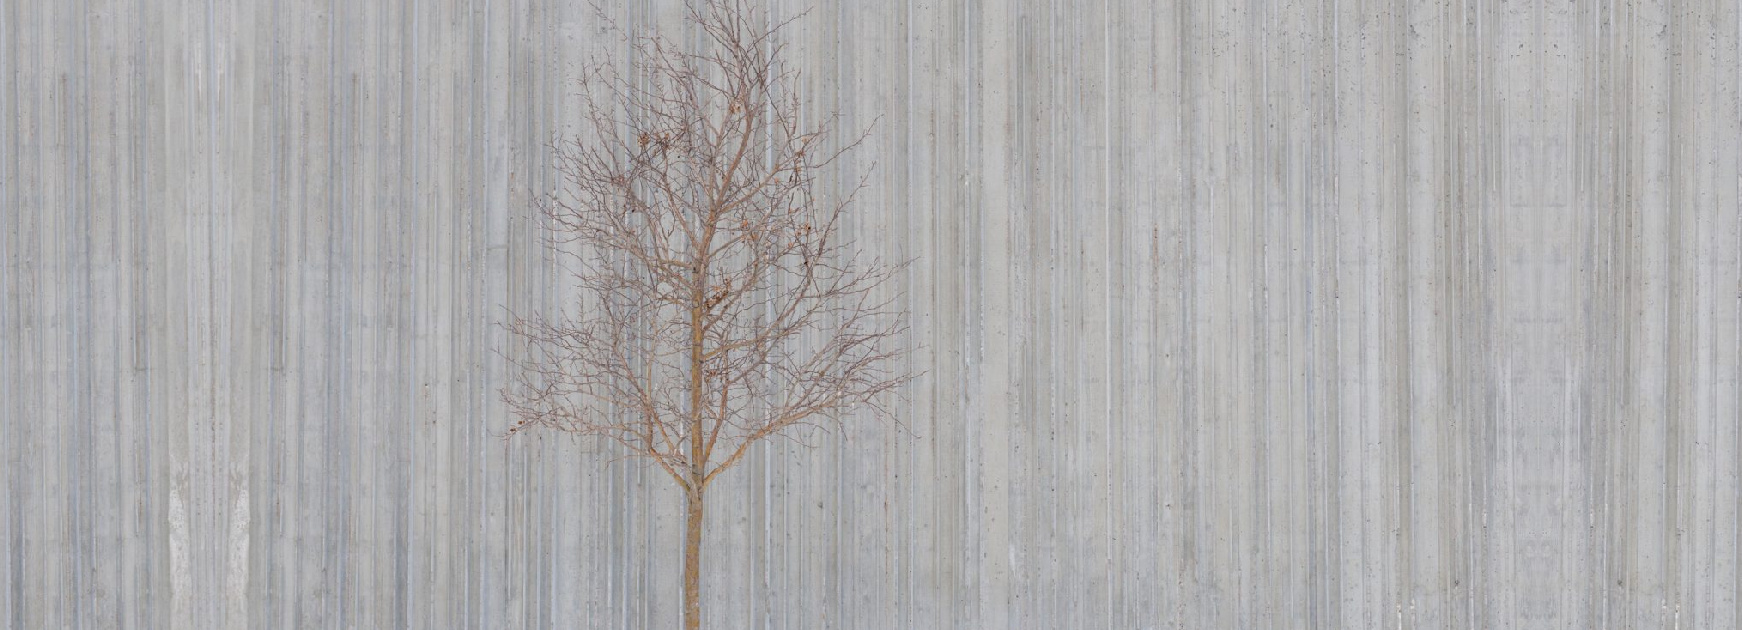 Tree in front of the Clyfford Still Museum in the snow